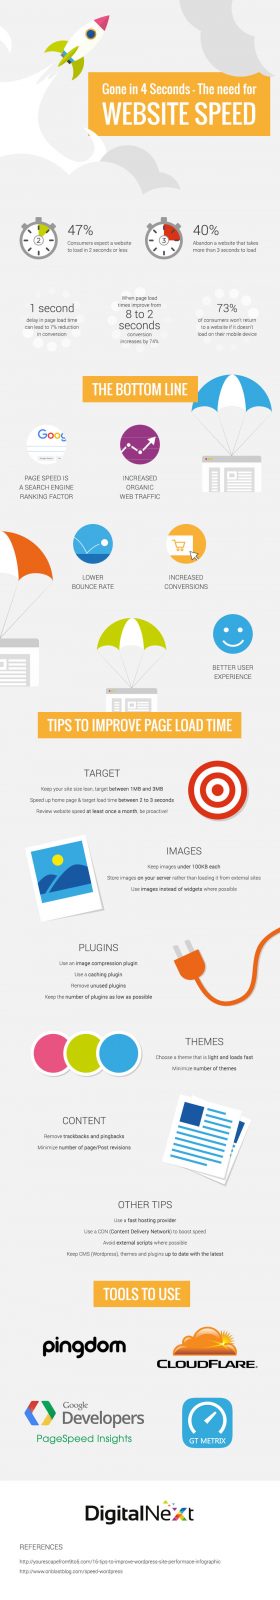 Website Speed: Tips on How to Improve Your Website Speed [Infographic]